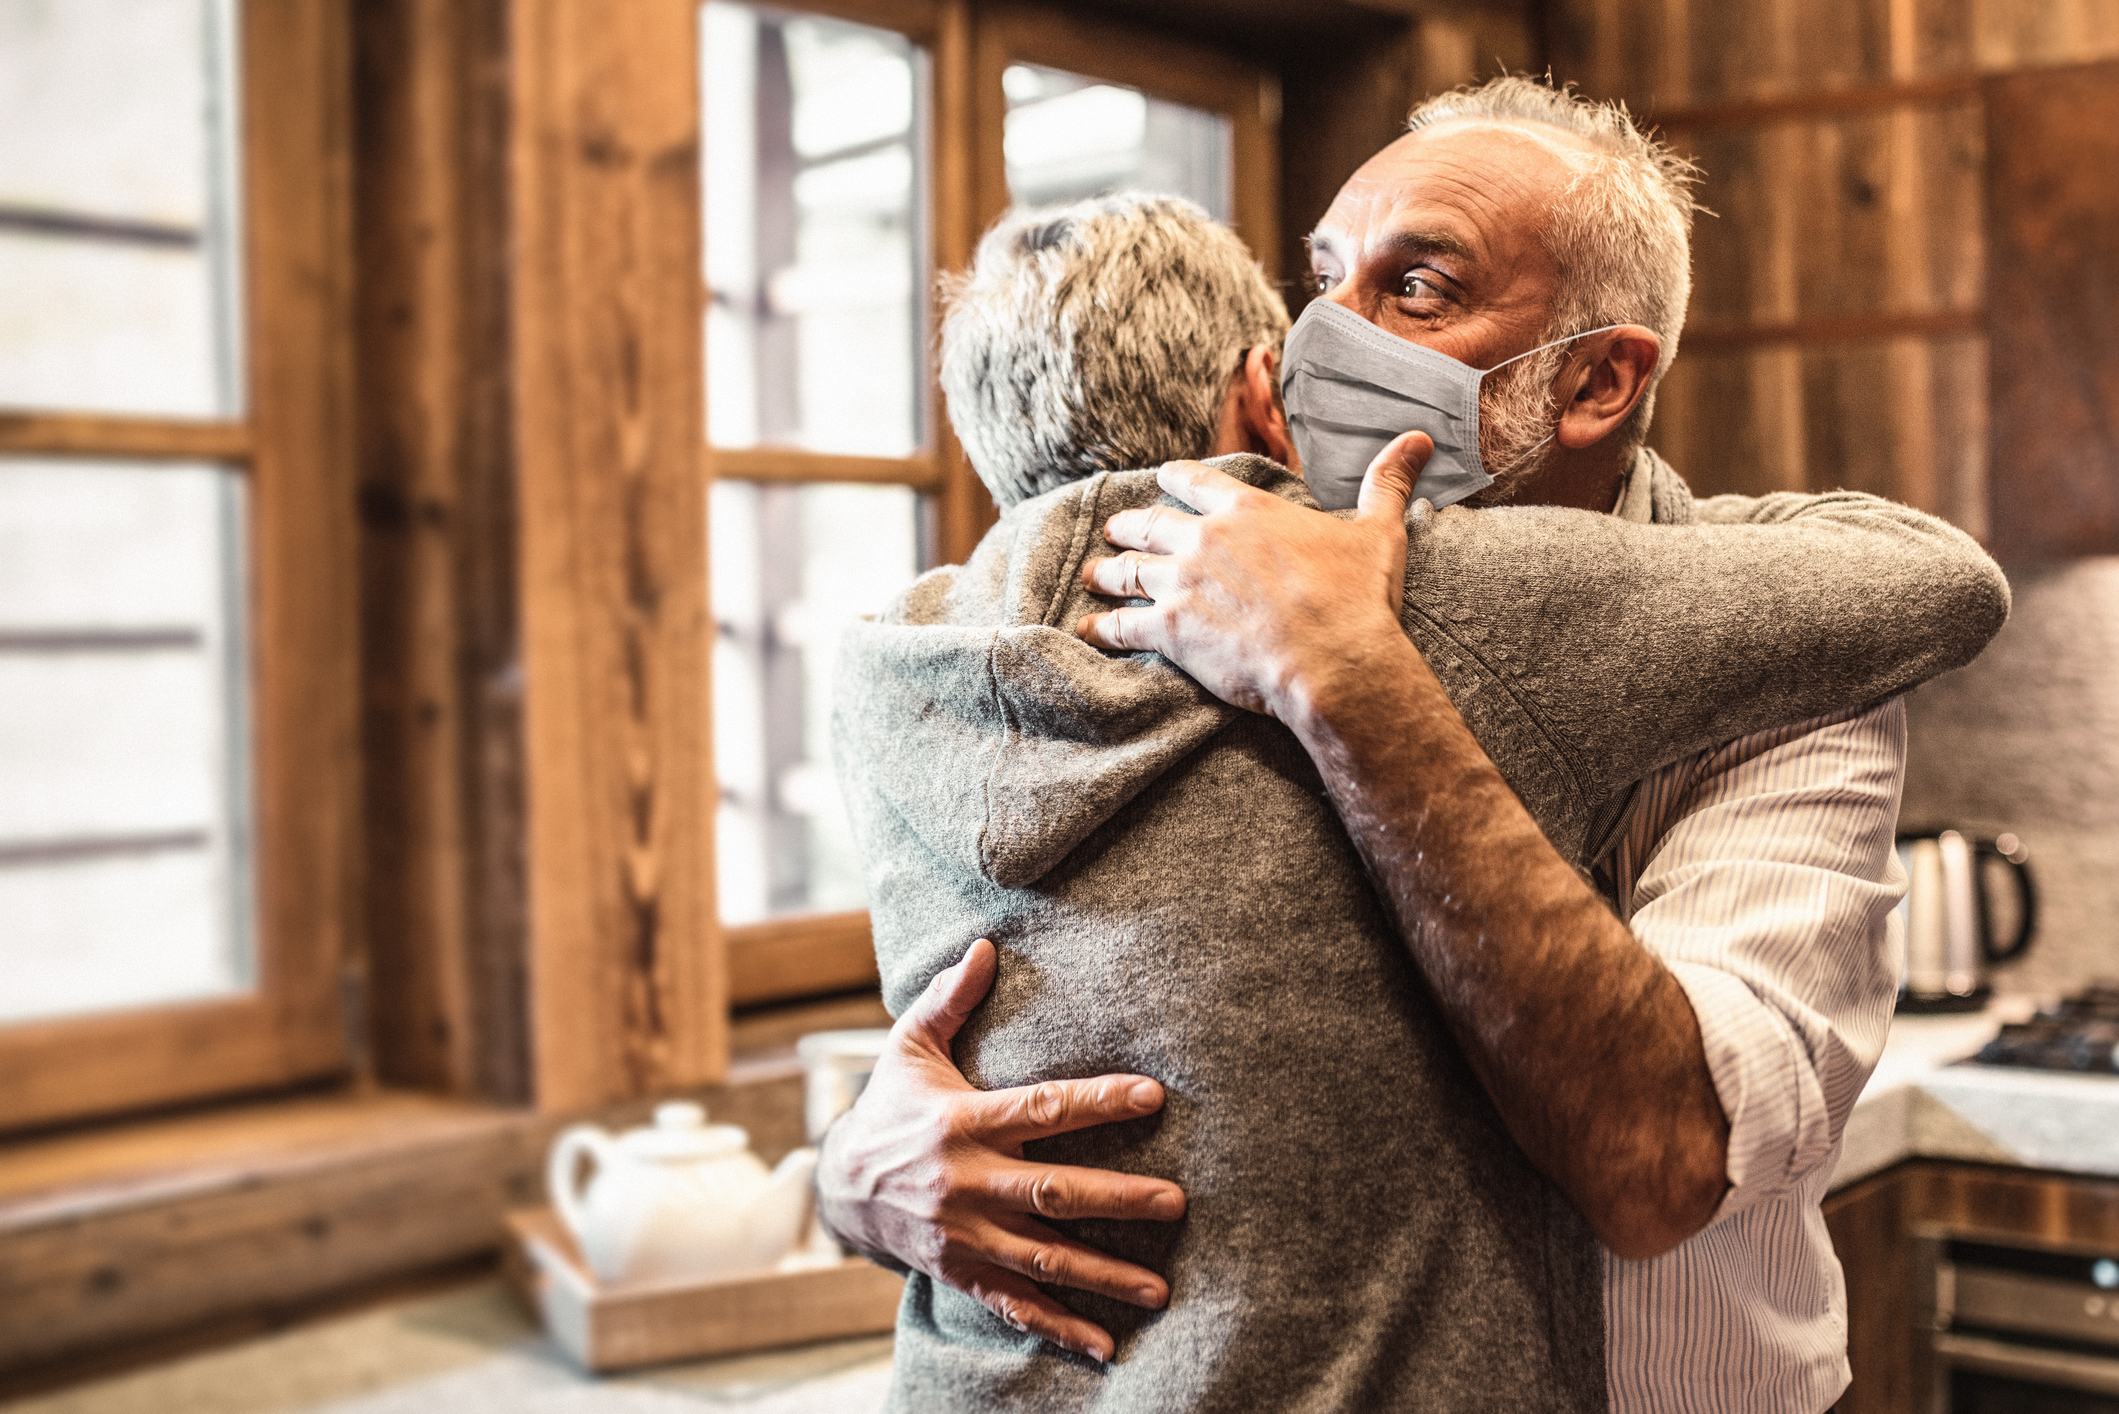 Older Caucasian couple embracing in a cabin kitchen with white-haired man with surgical mask looks to the window